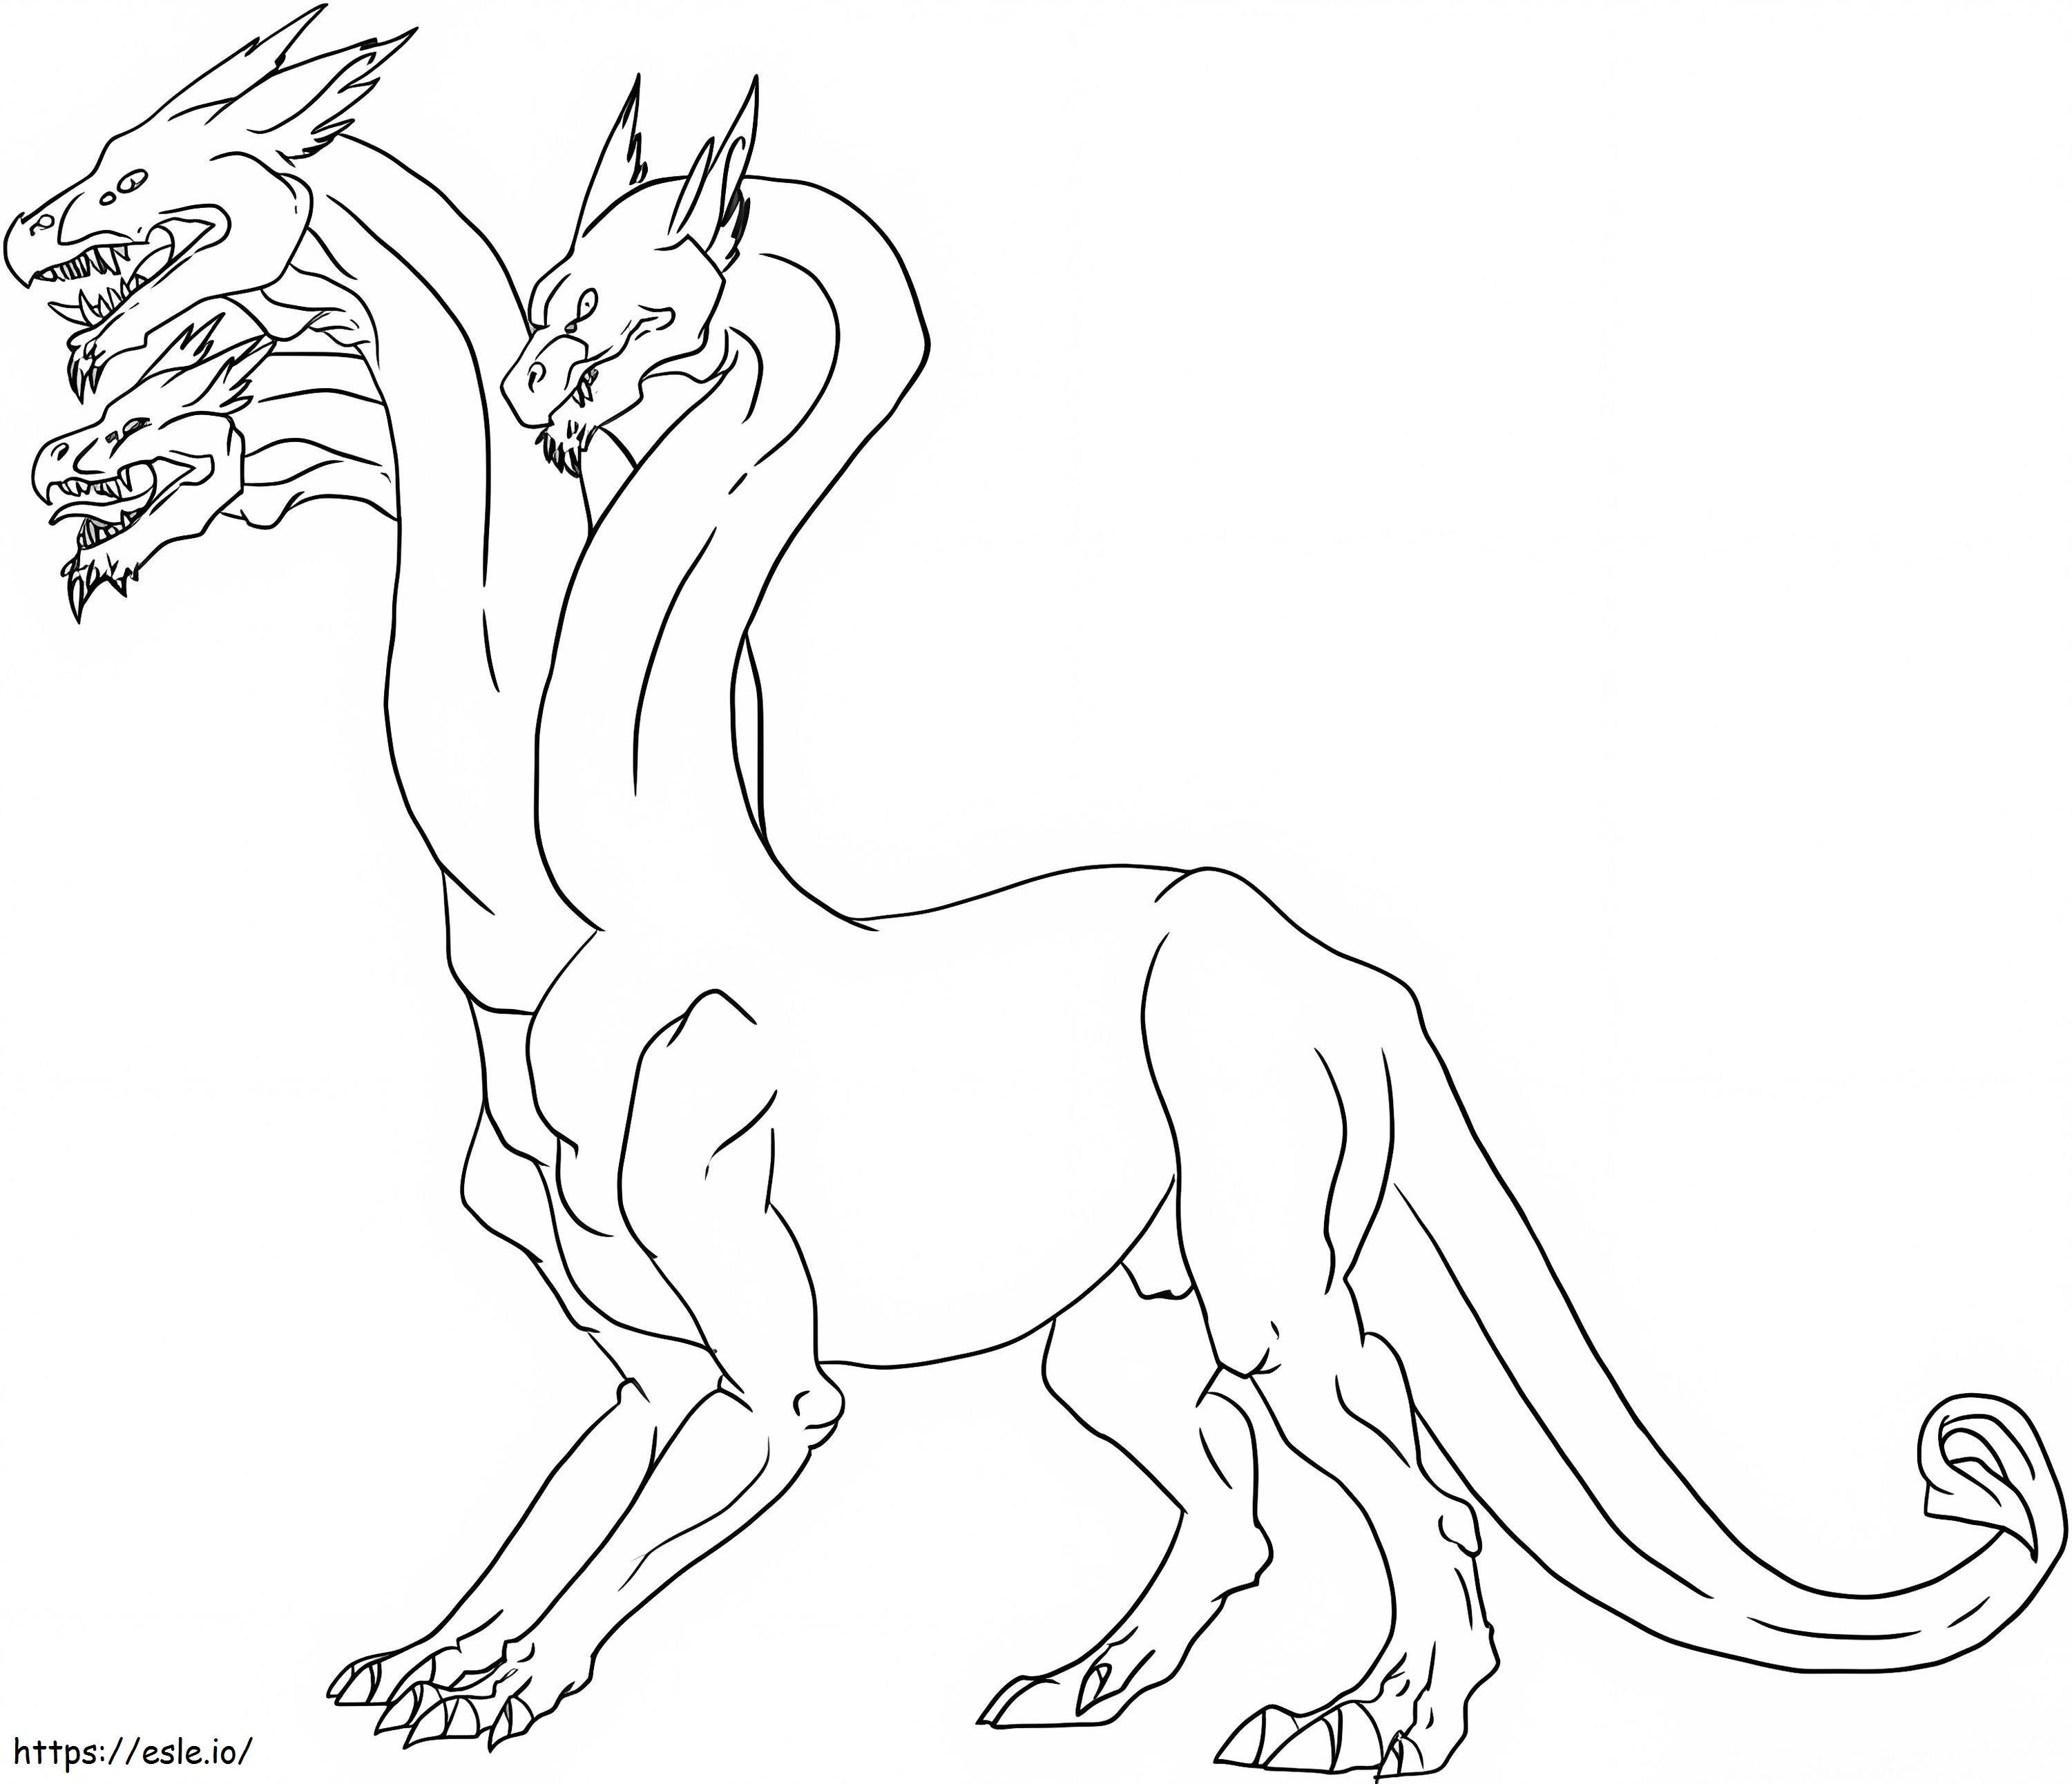 Stunning Hydra coloring page